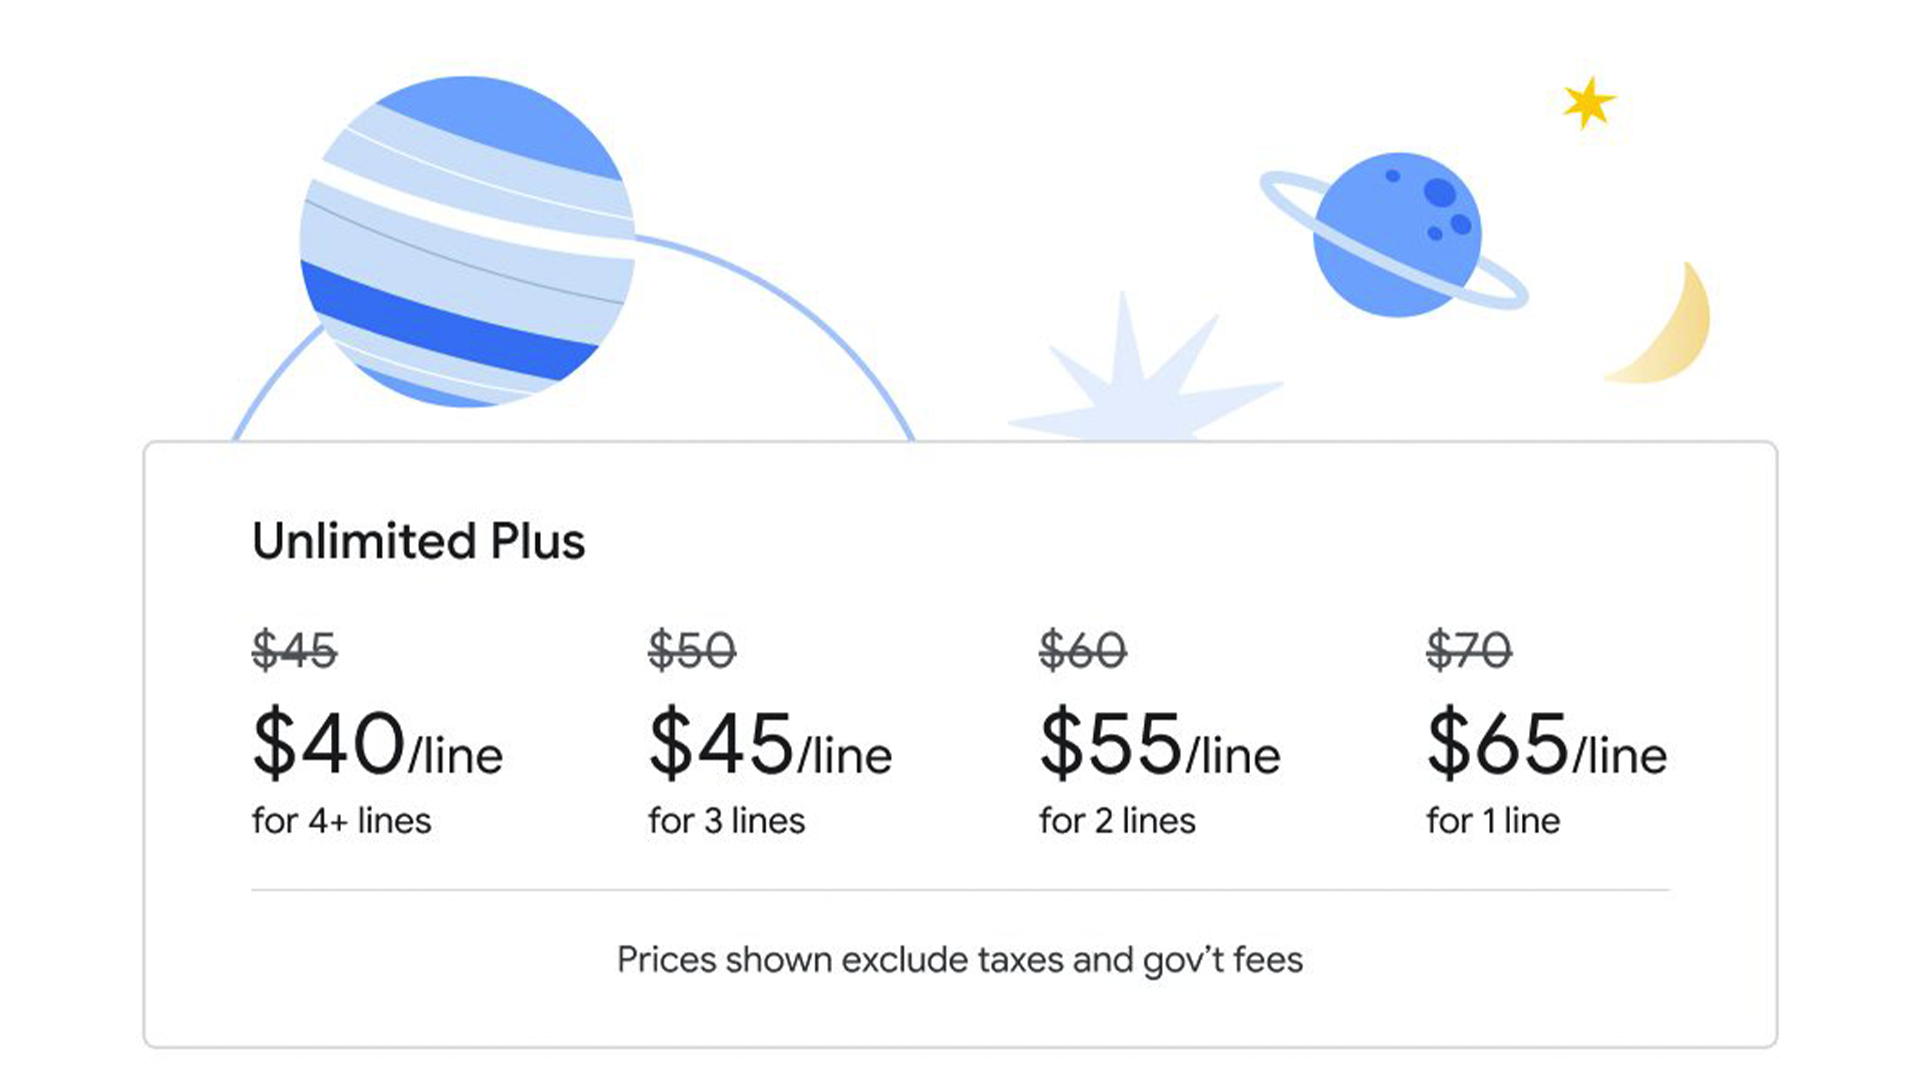 Google Fi's new Unlimited Plus rates start at $65 for one line.